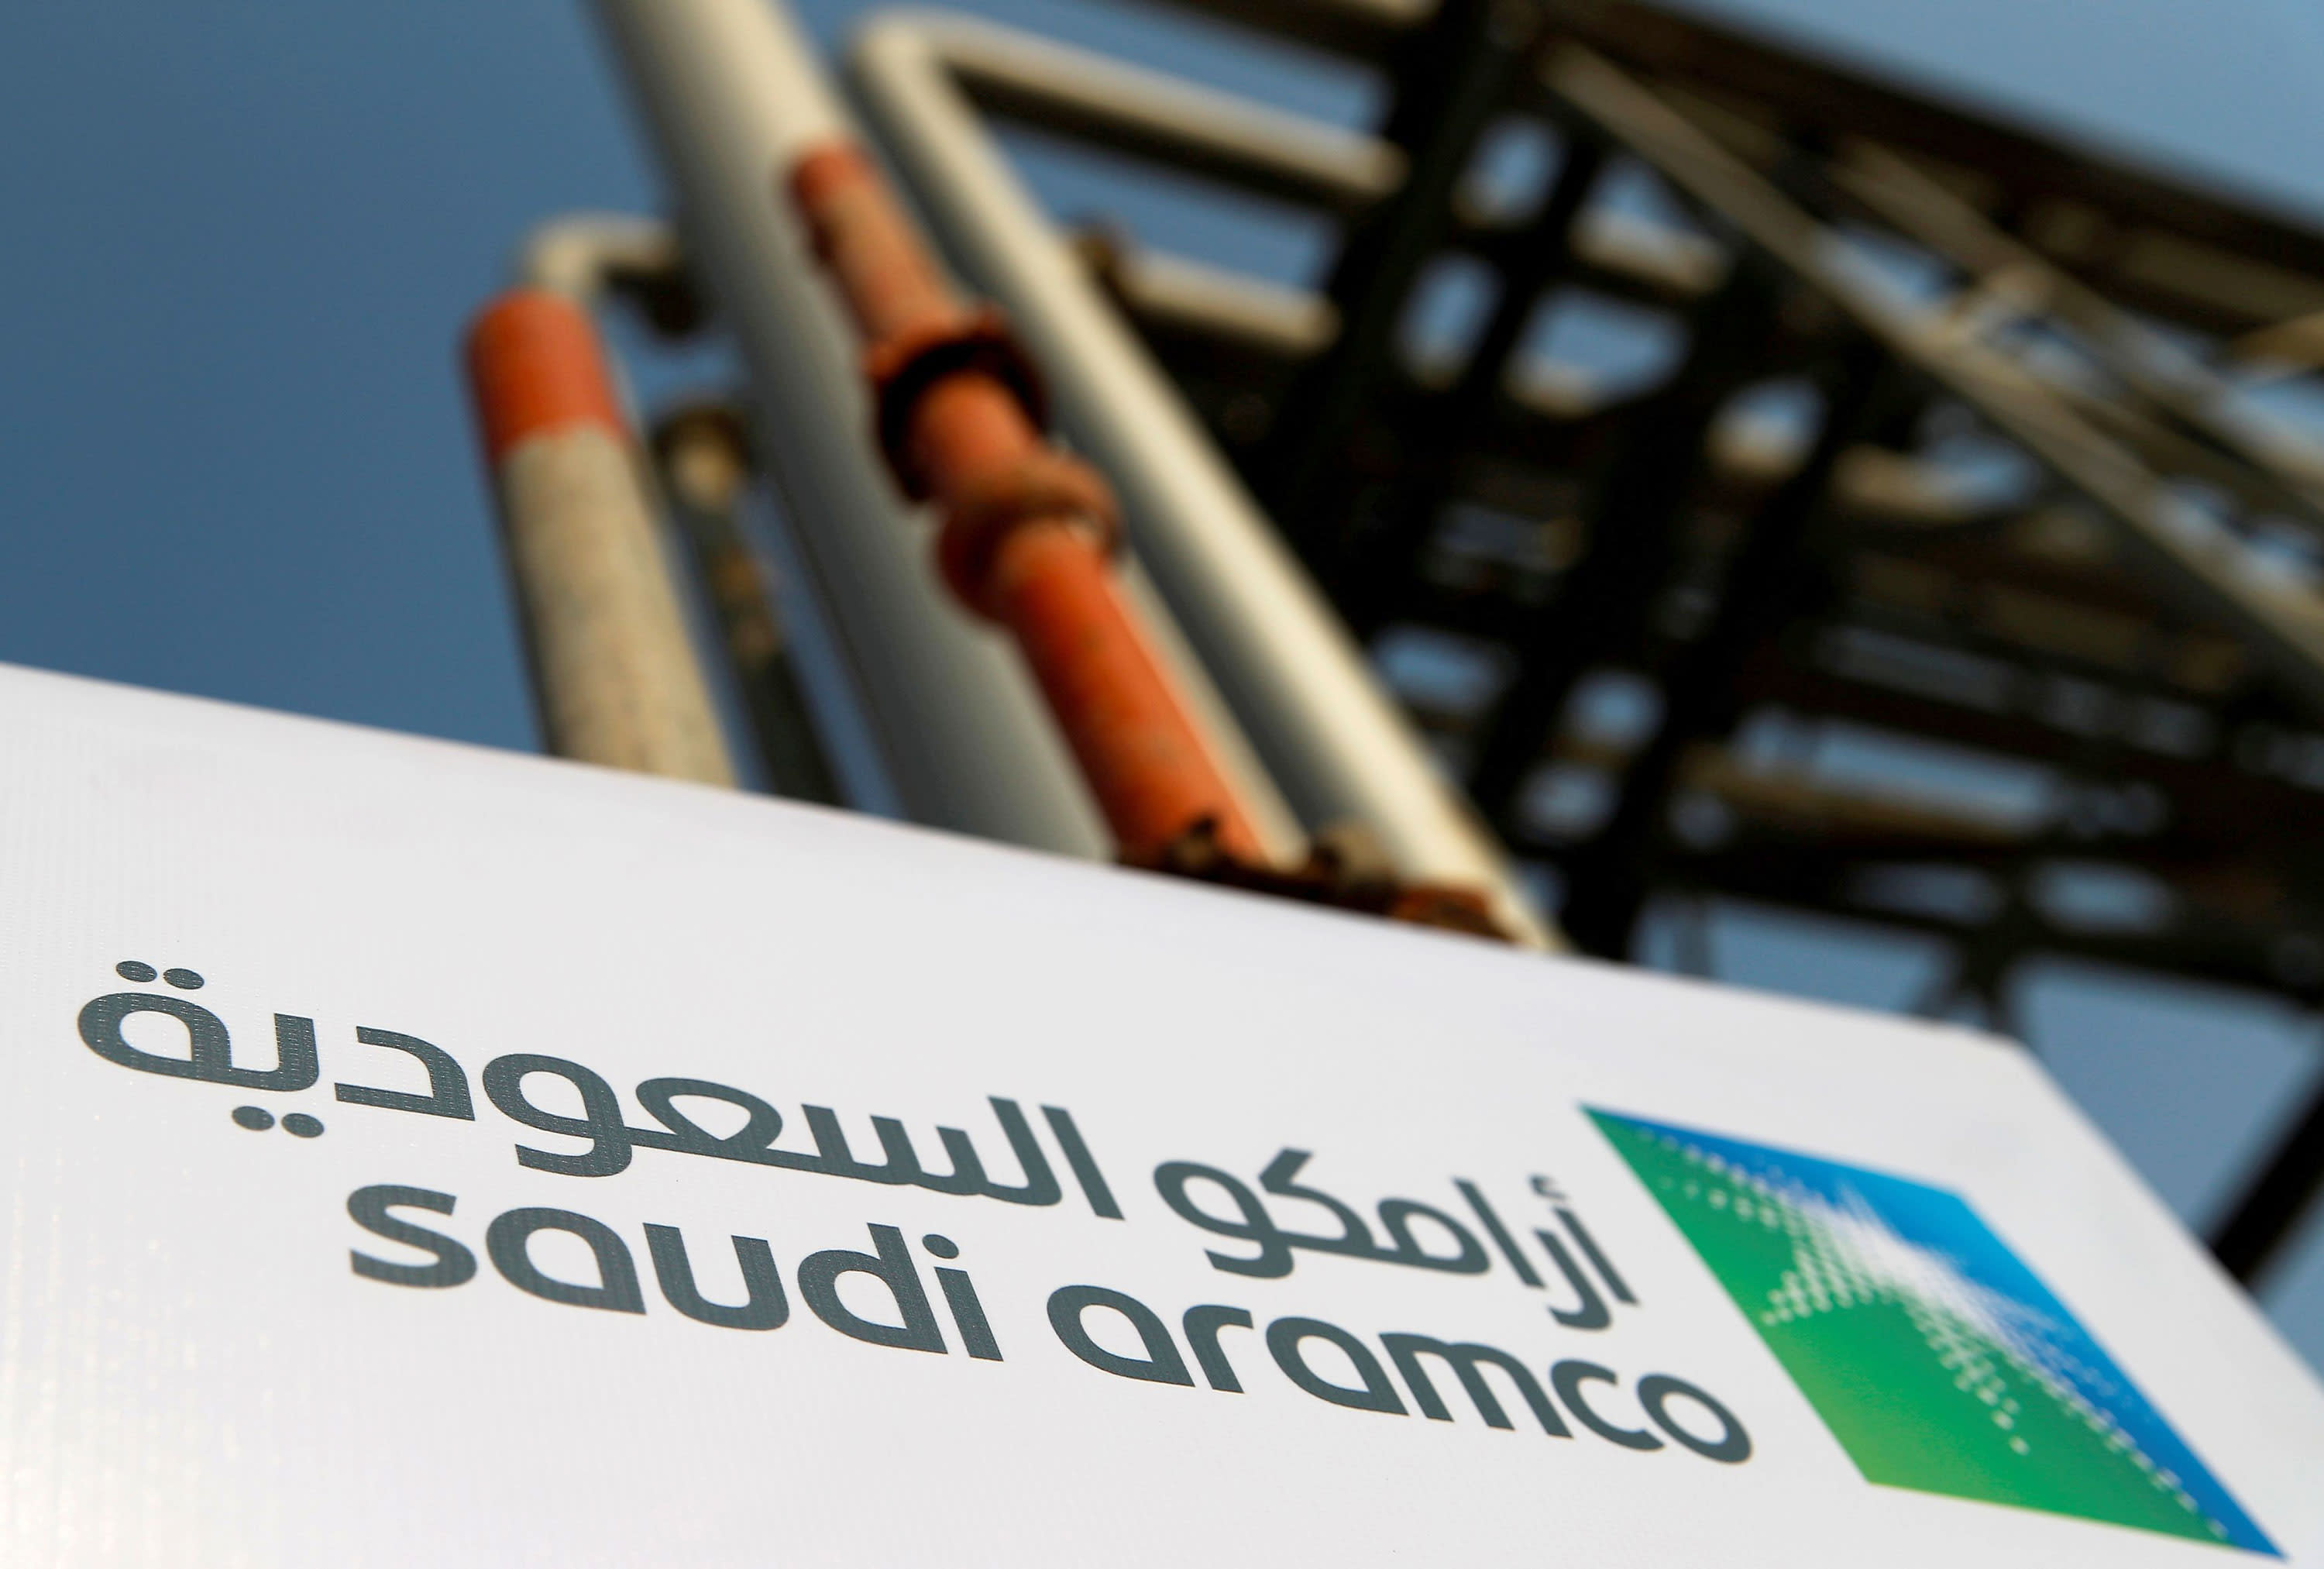 Saudi Aramco posts 160% rise in third quarter profit, chairman calls for ‘stable’ energy transition